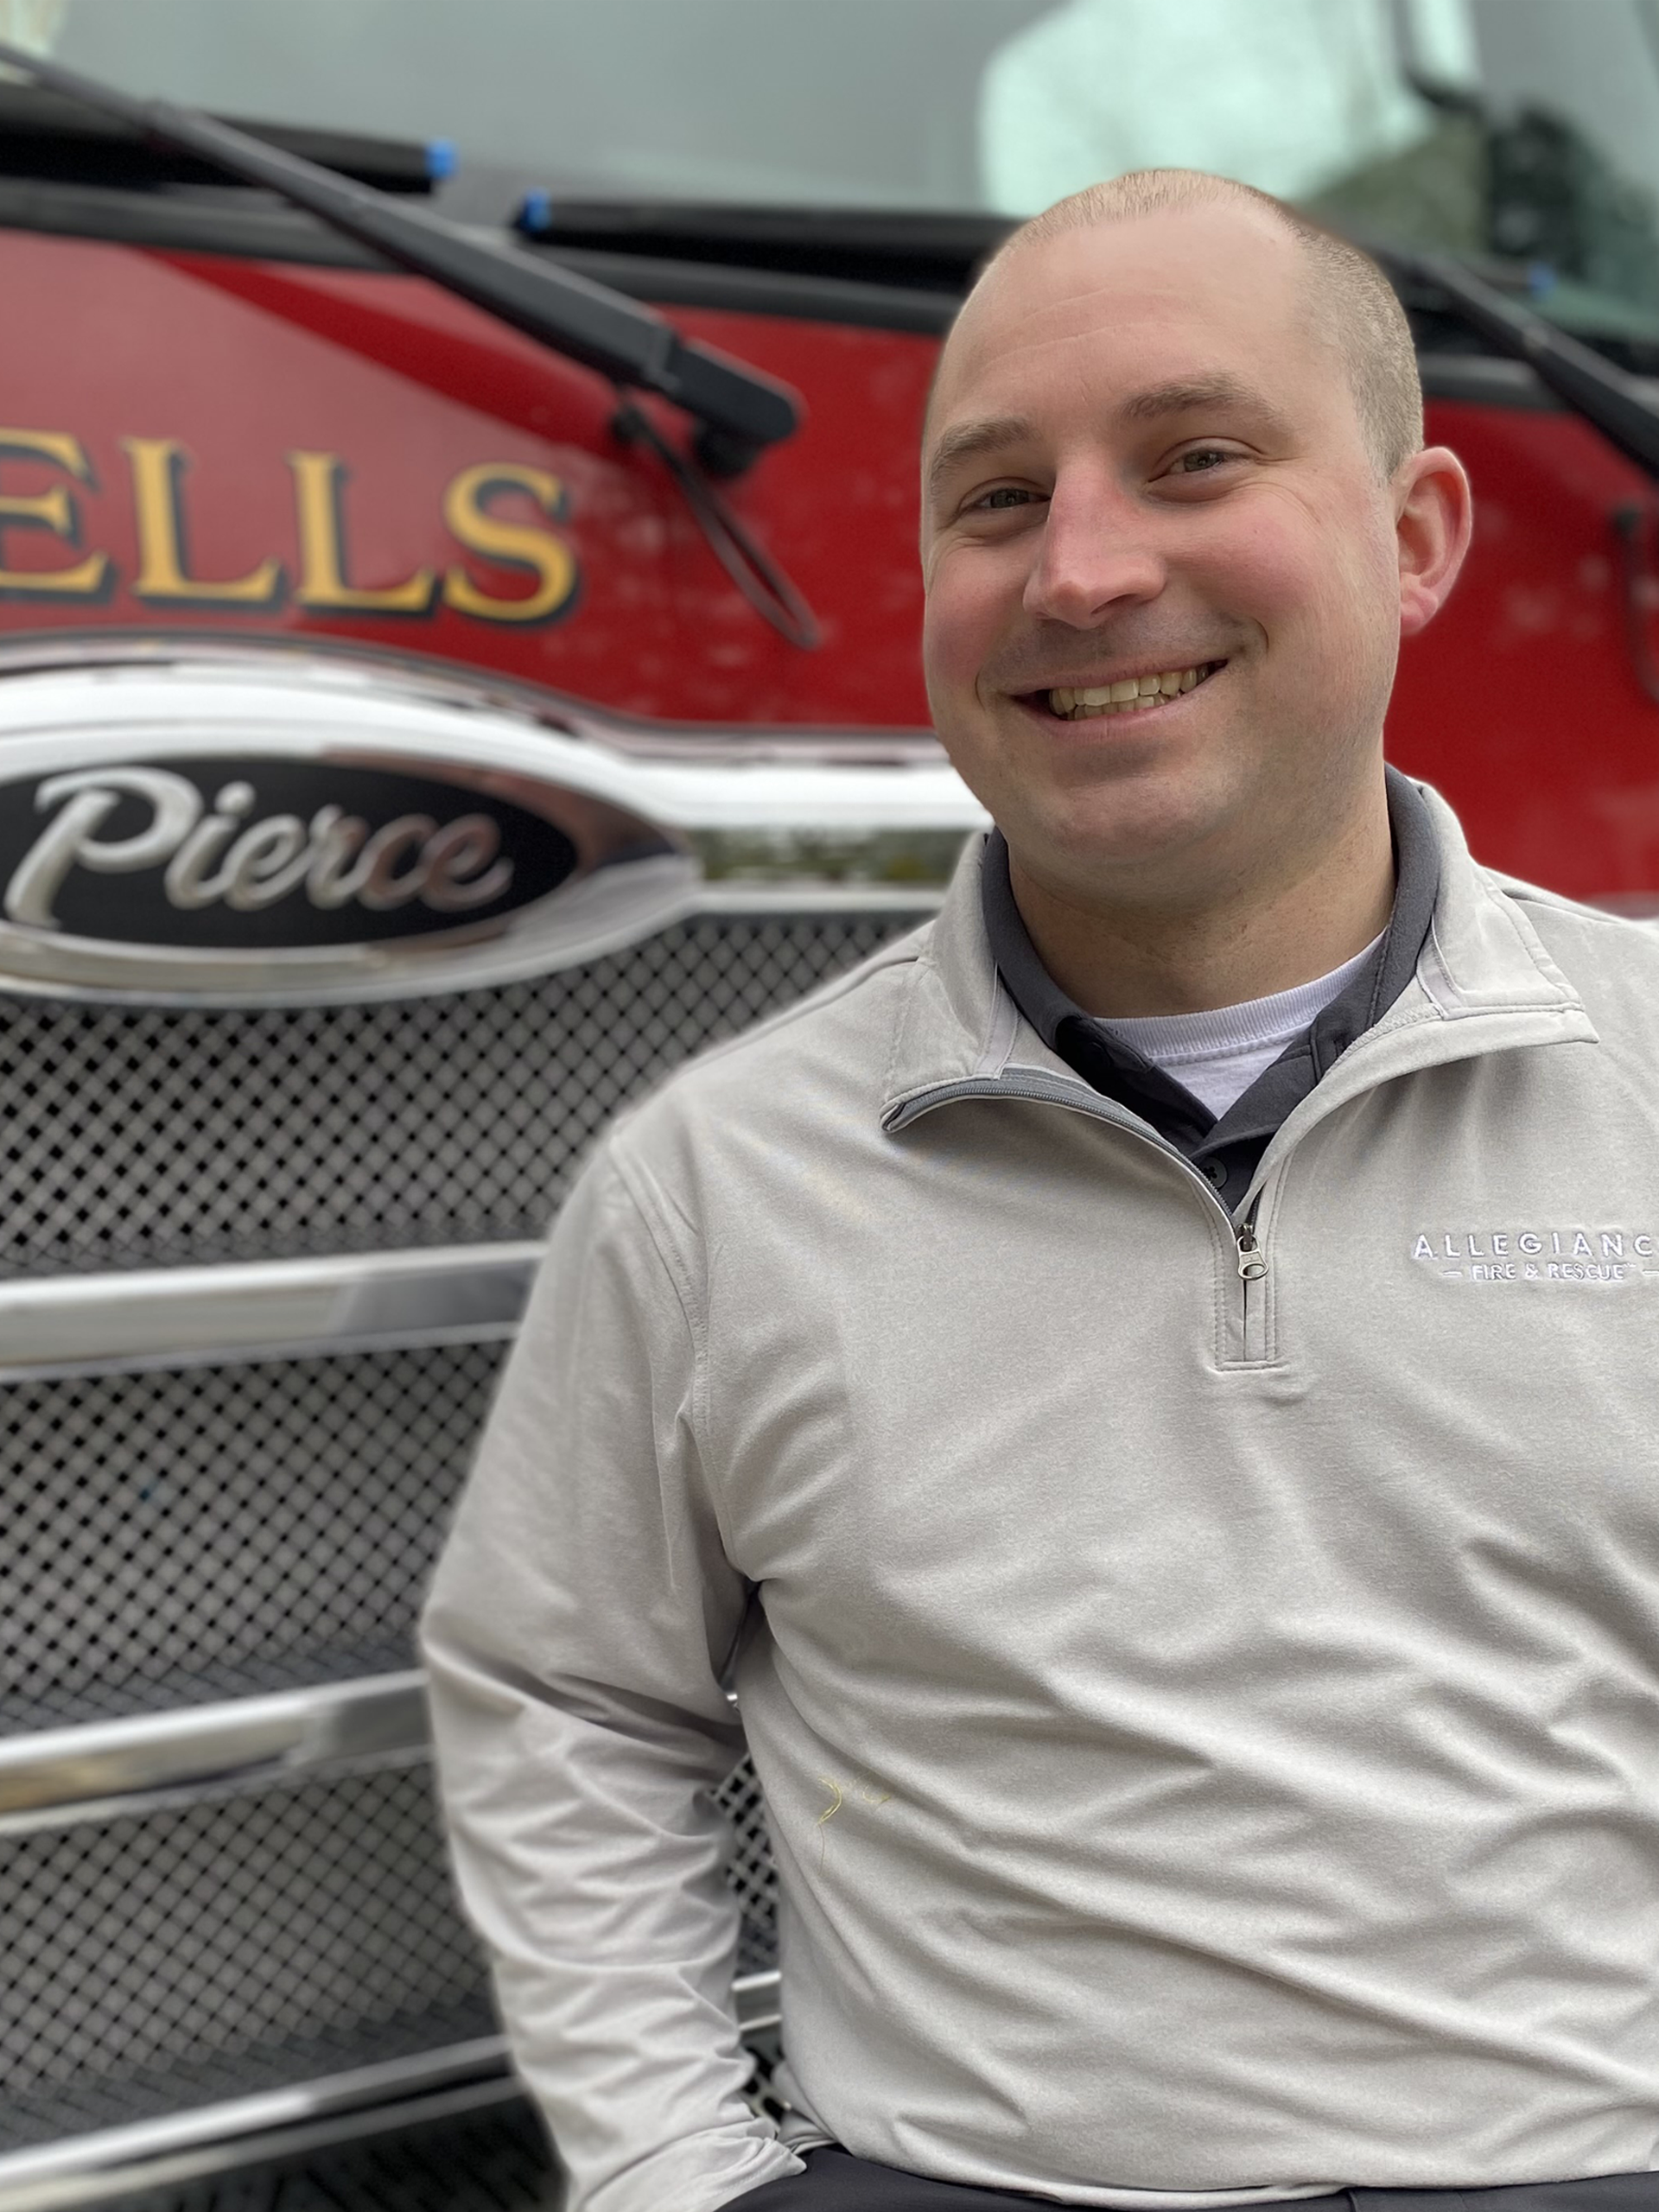 Bill Kimball, a professional Sales Rep sitting on the front bumper of the Wells, Pierce fire truck. He is wearing an off-white allegiance fire & rescue quarter zip shirt, clean shaven head and face, with a friendly smile.